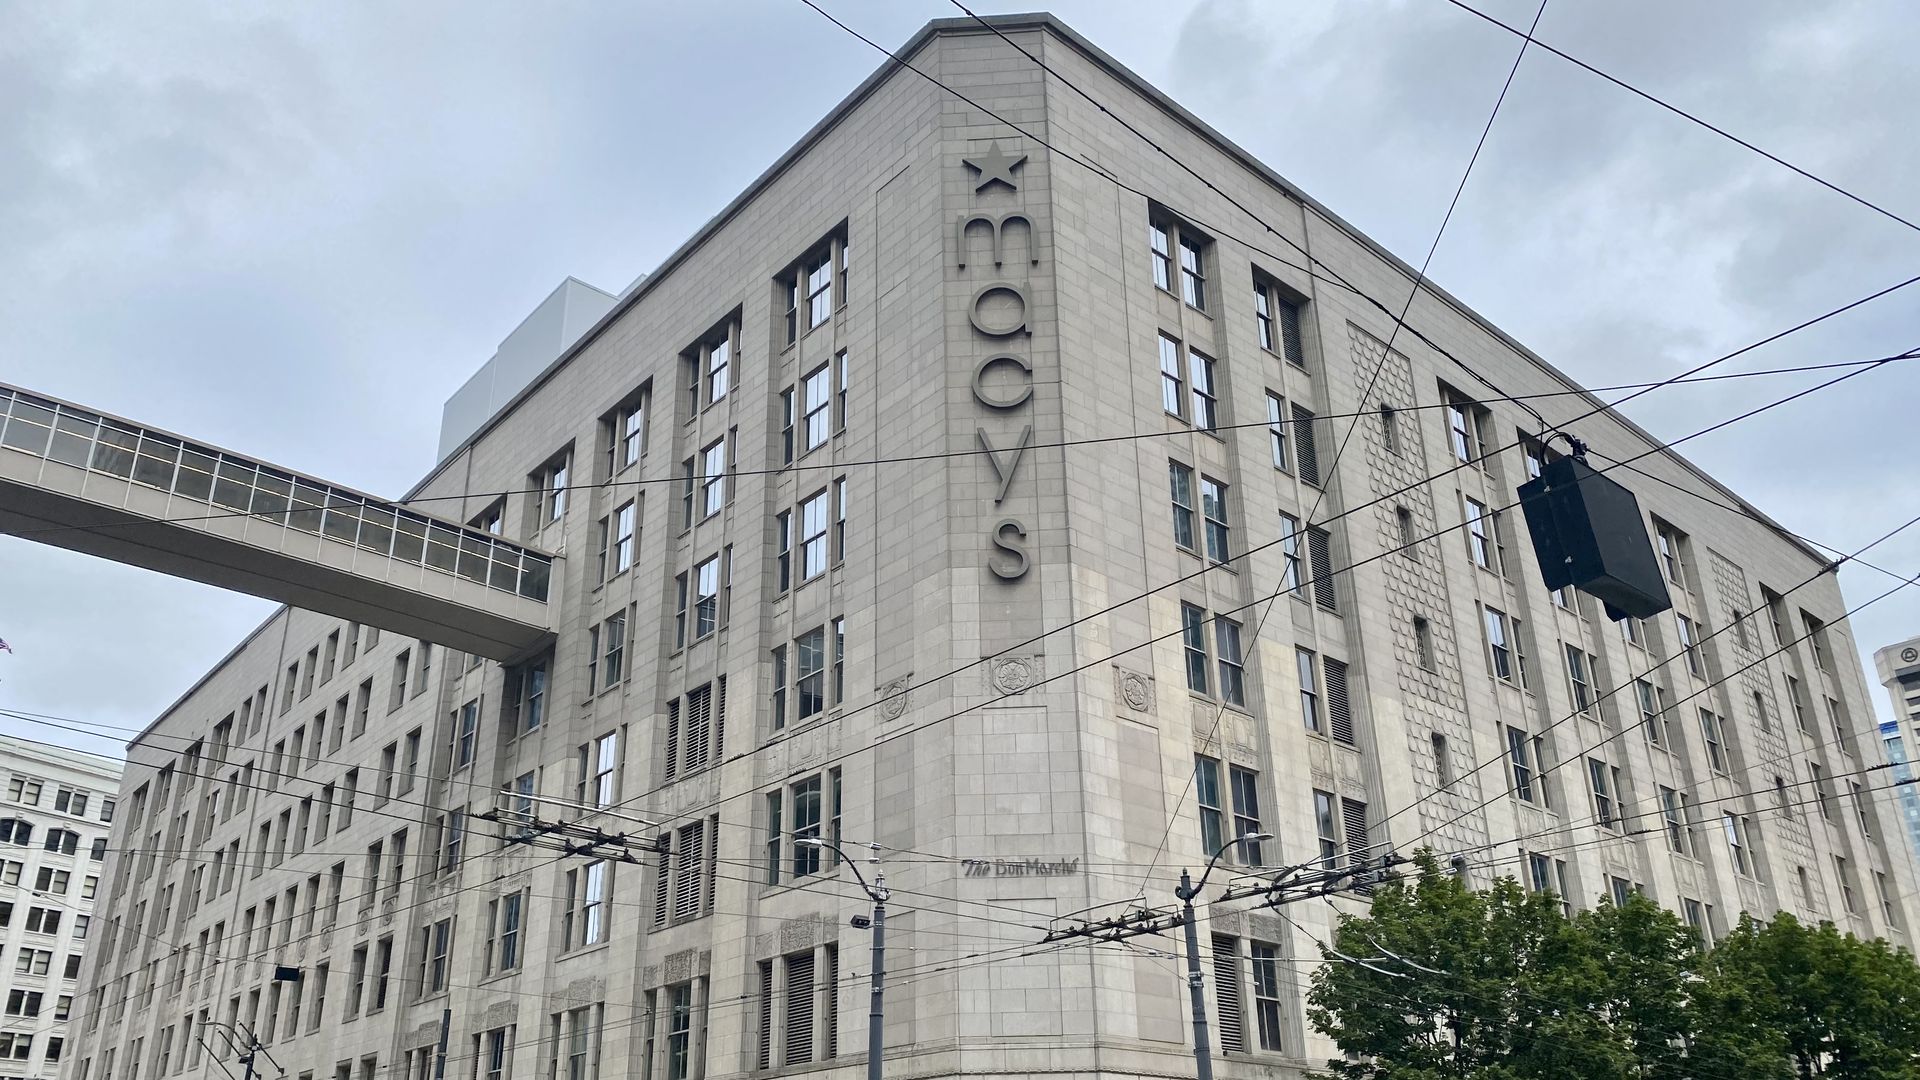 A grey building with letters spelling "Macy's" displayed vertically on the building corner.